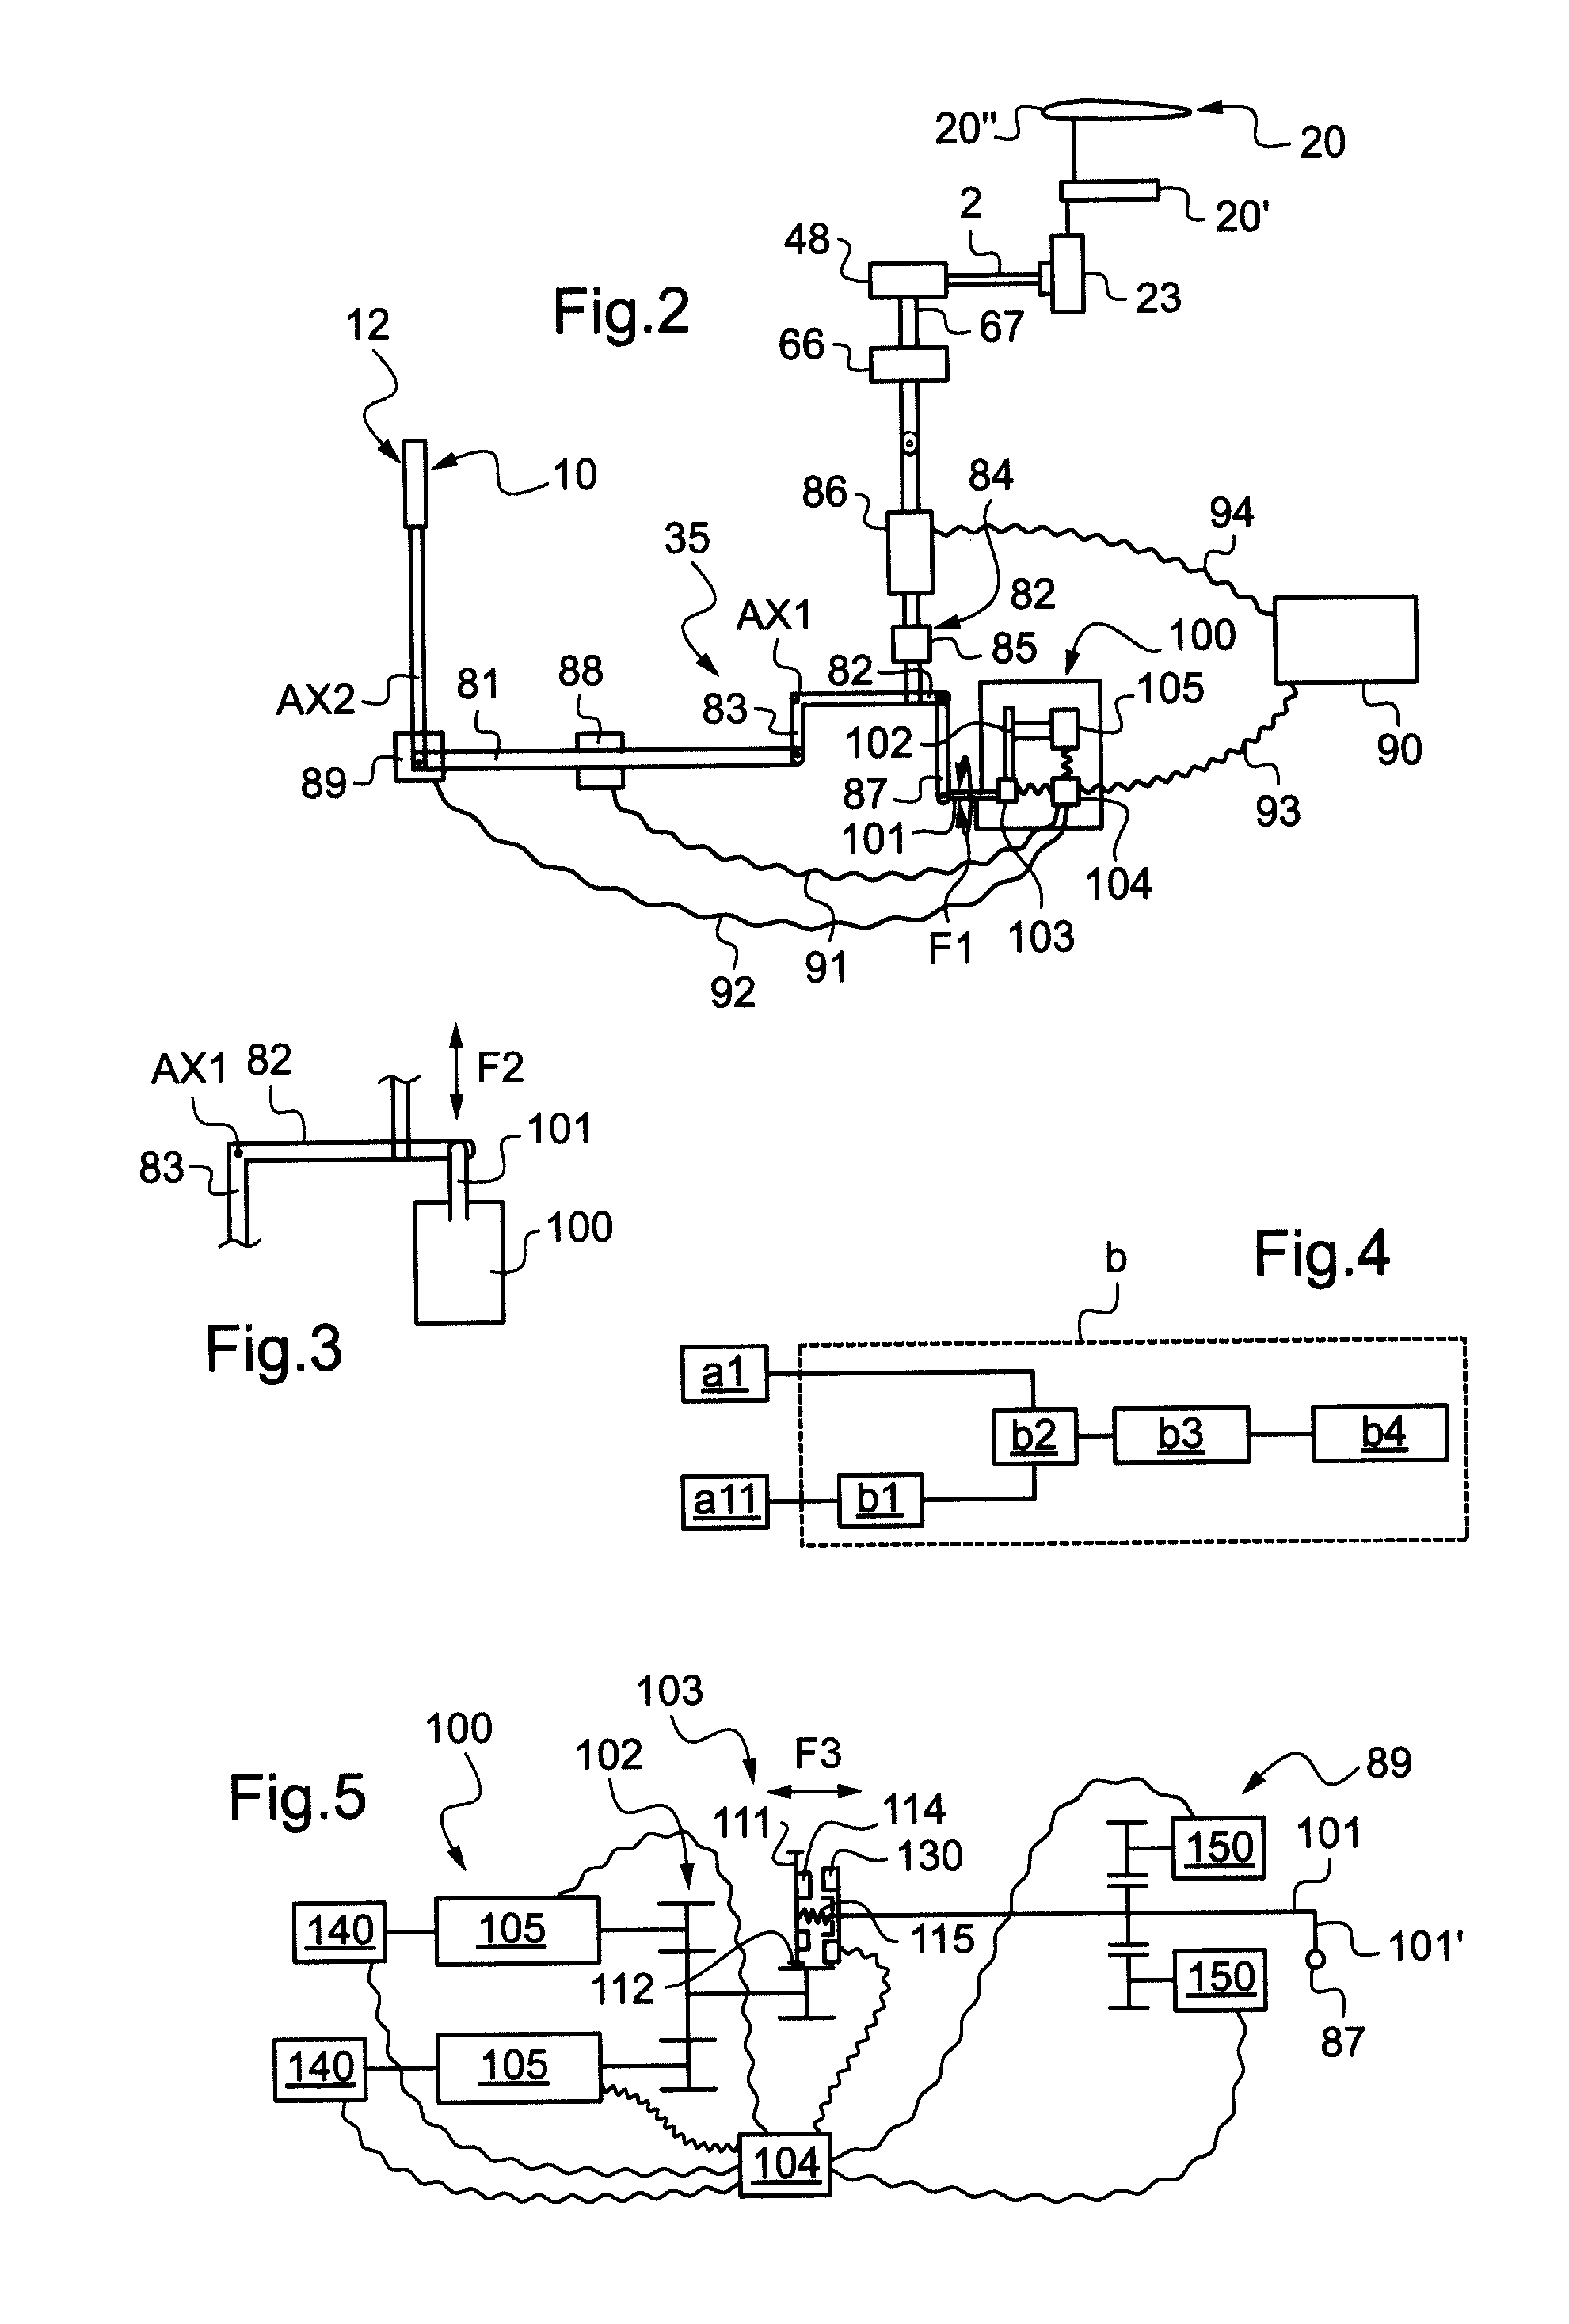 Method of assisting piloting, piloting assistance means, and a piloting assistance device for a rotorcraft using said piloting assistance means to implement said piloting assistance method